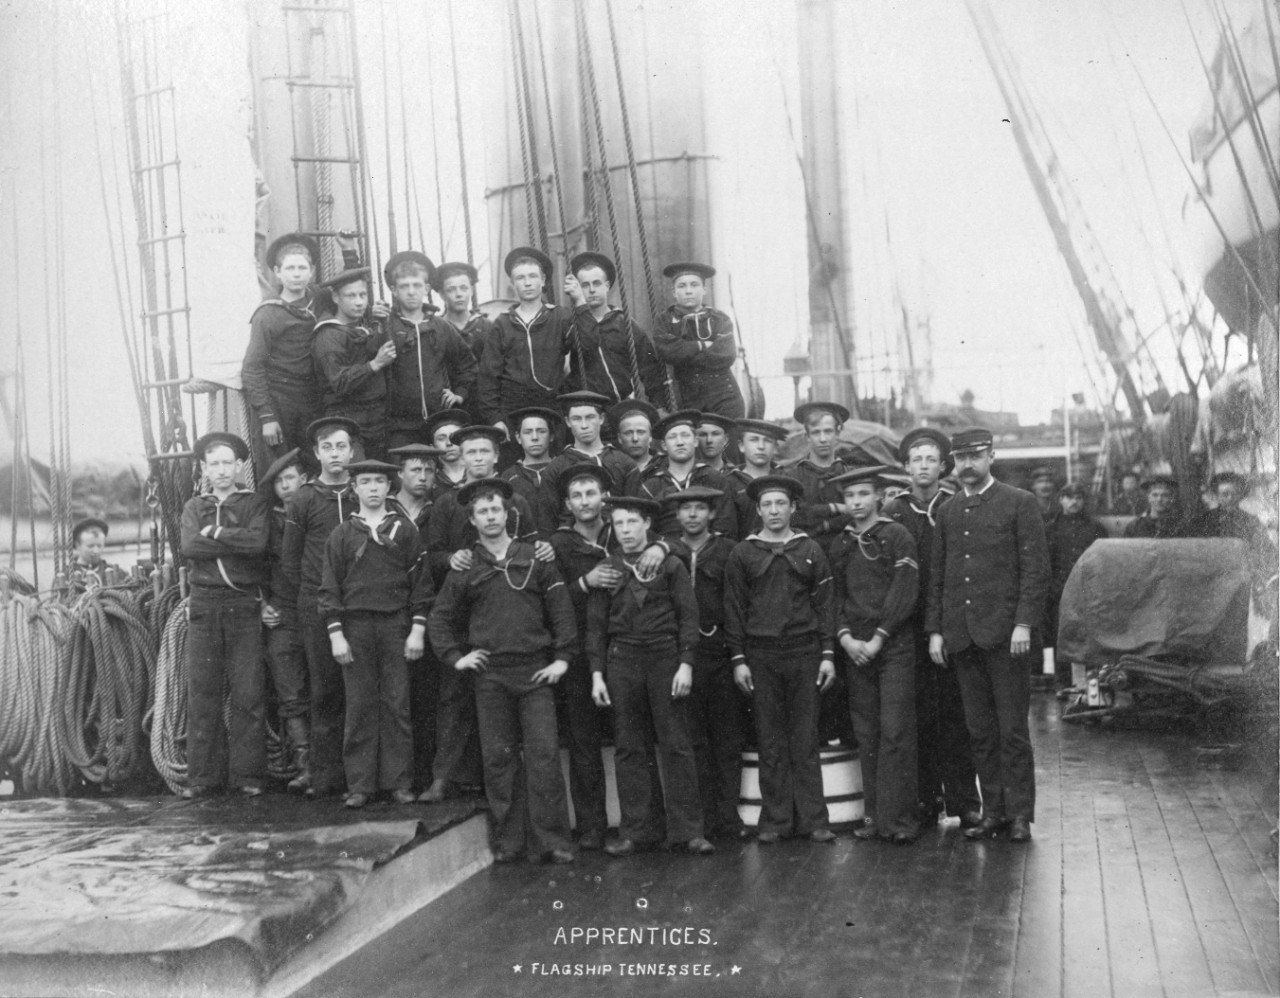 Scrapbook containing crew photos and scenes on board USS Tennessee, circa 1885. Identified individuals include Rear Admiral James Jouett, Midshipman John Ellicott, Captain Oscar Stanton, Passed Assistant Engineer Robert Milligan. Many photos have been assigned NH numbers.